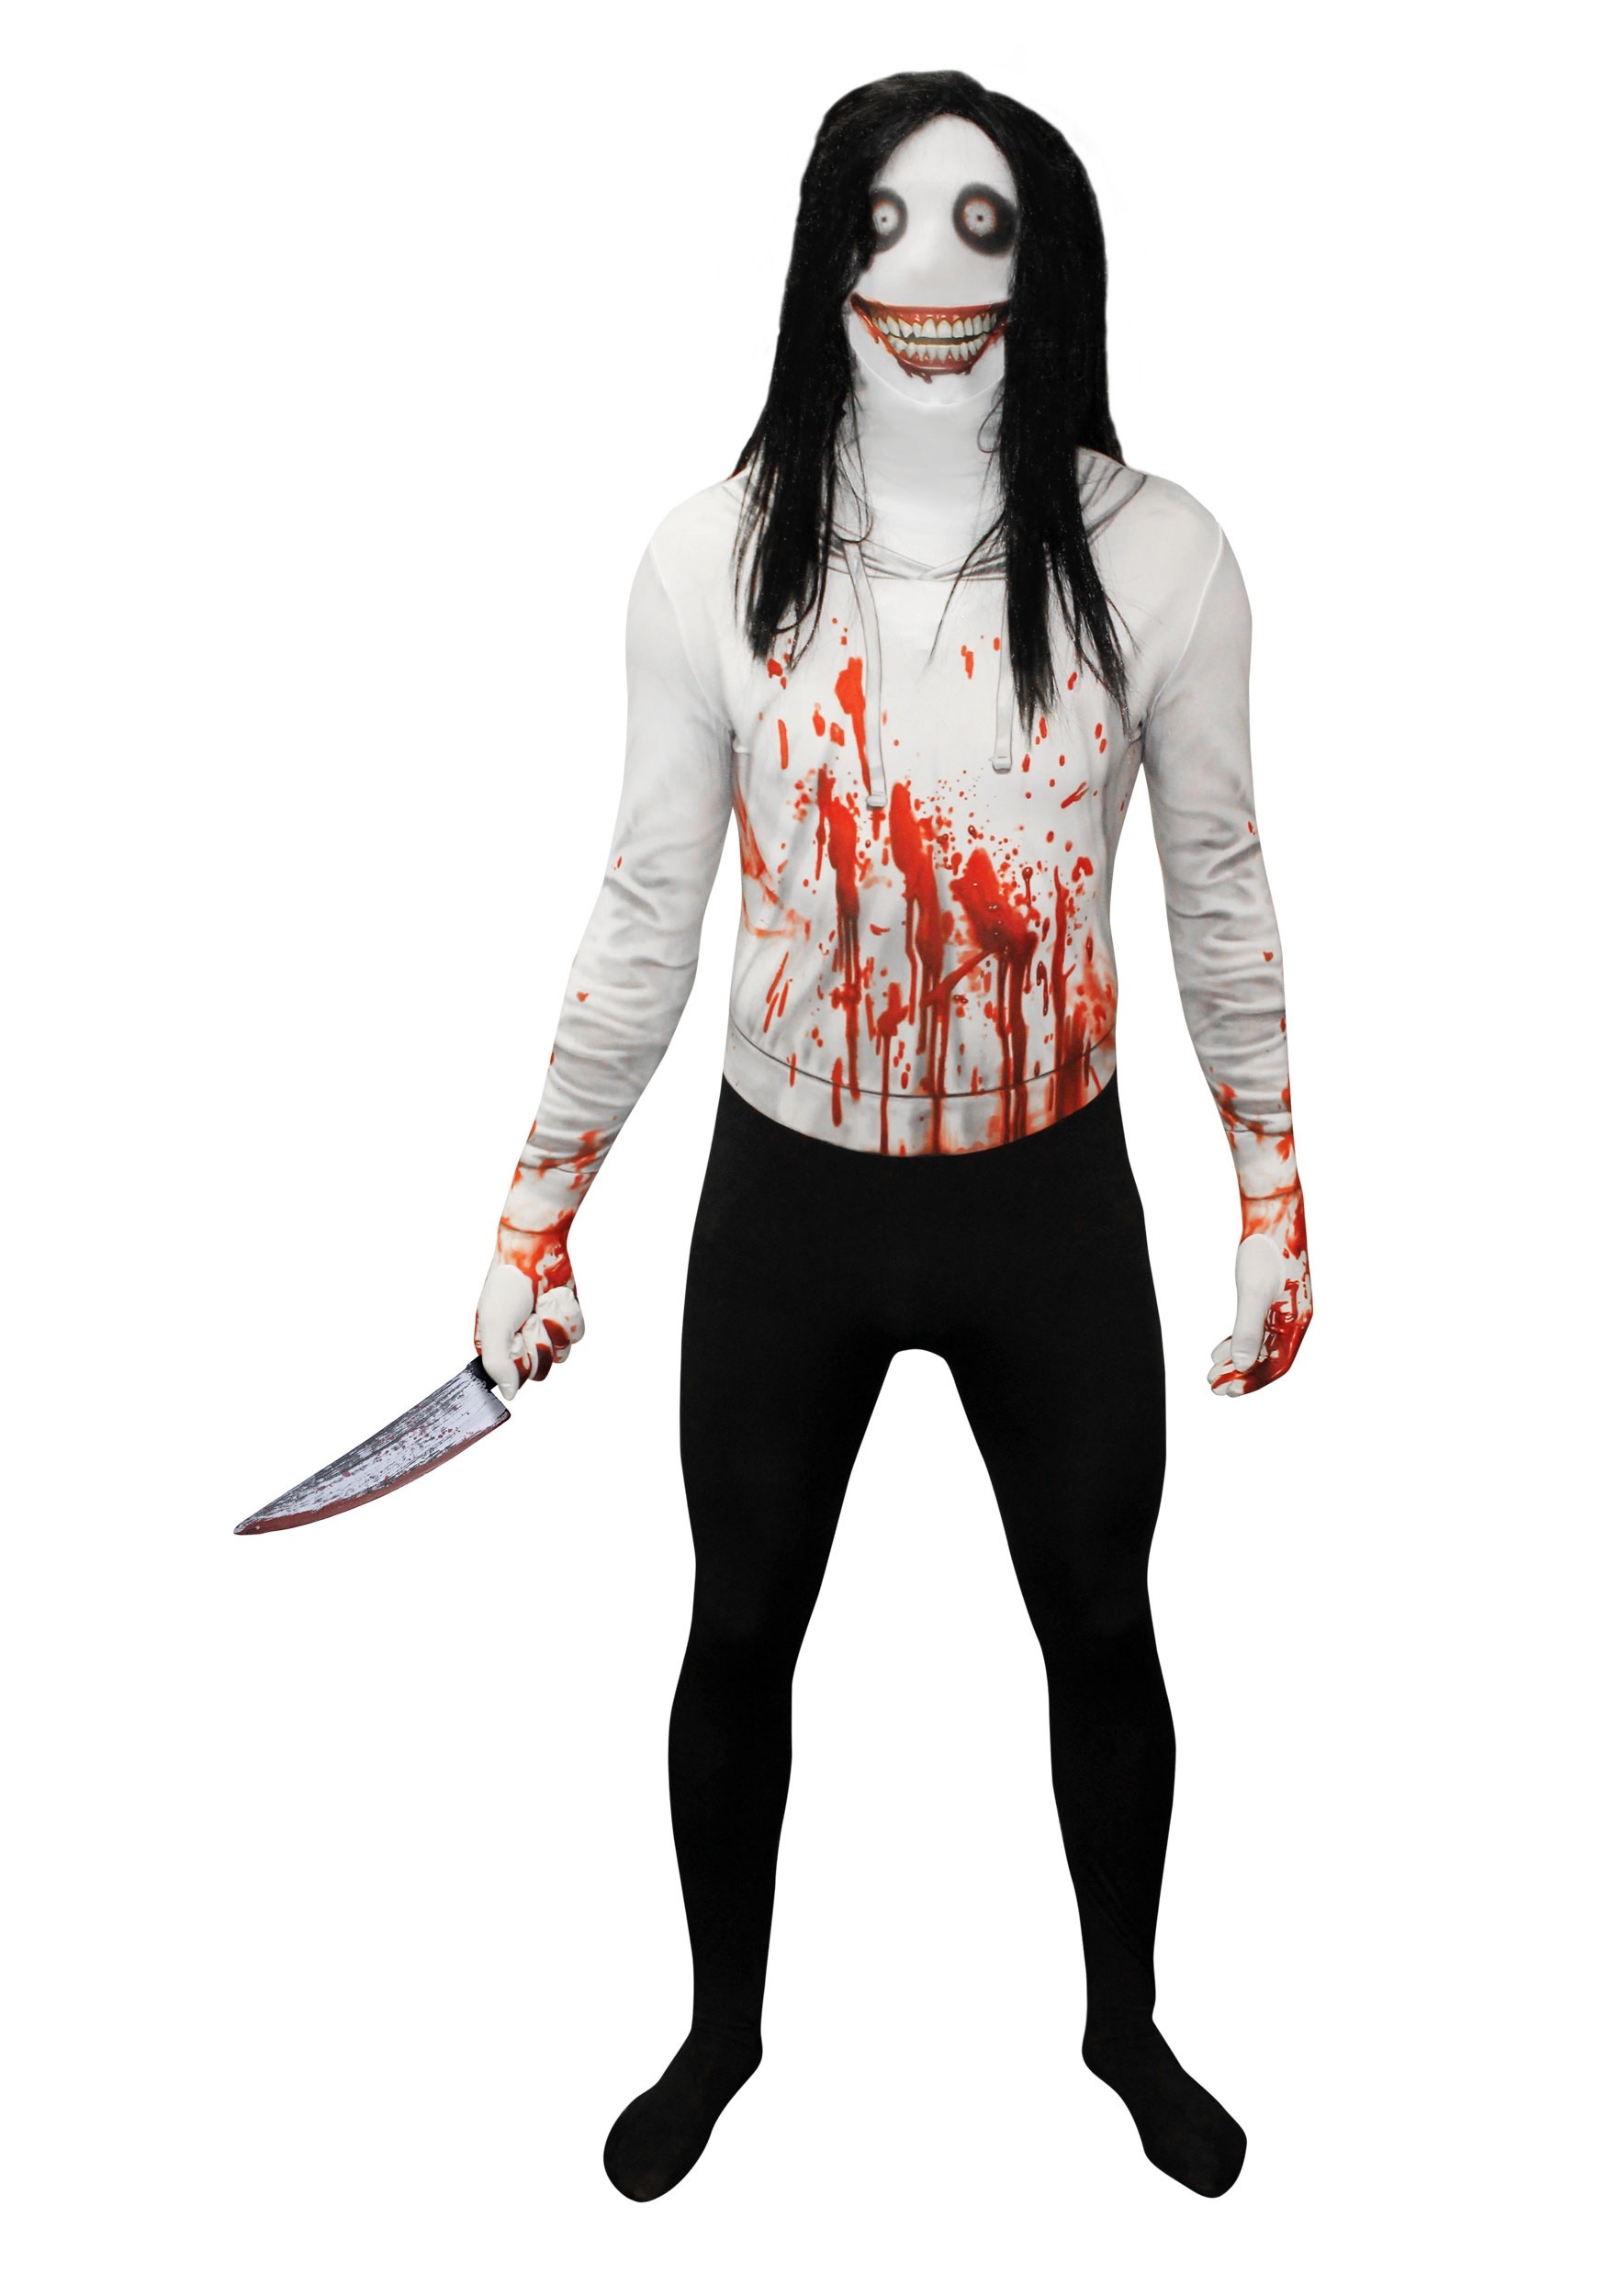 Photos - Fancy Dress Morphsuits Jeff the Killer Adult Morphsuit Black/Red/White MPMPJK